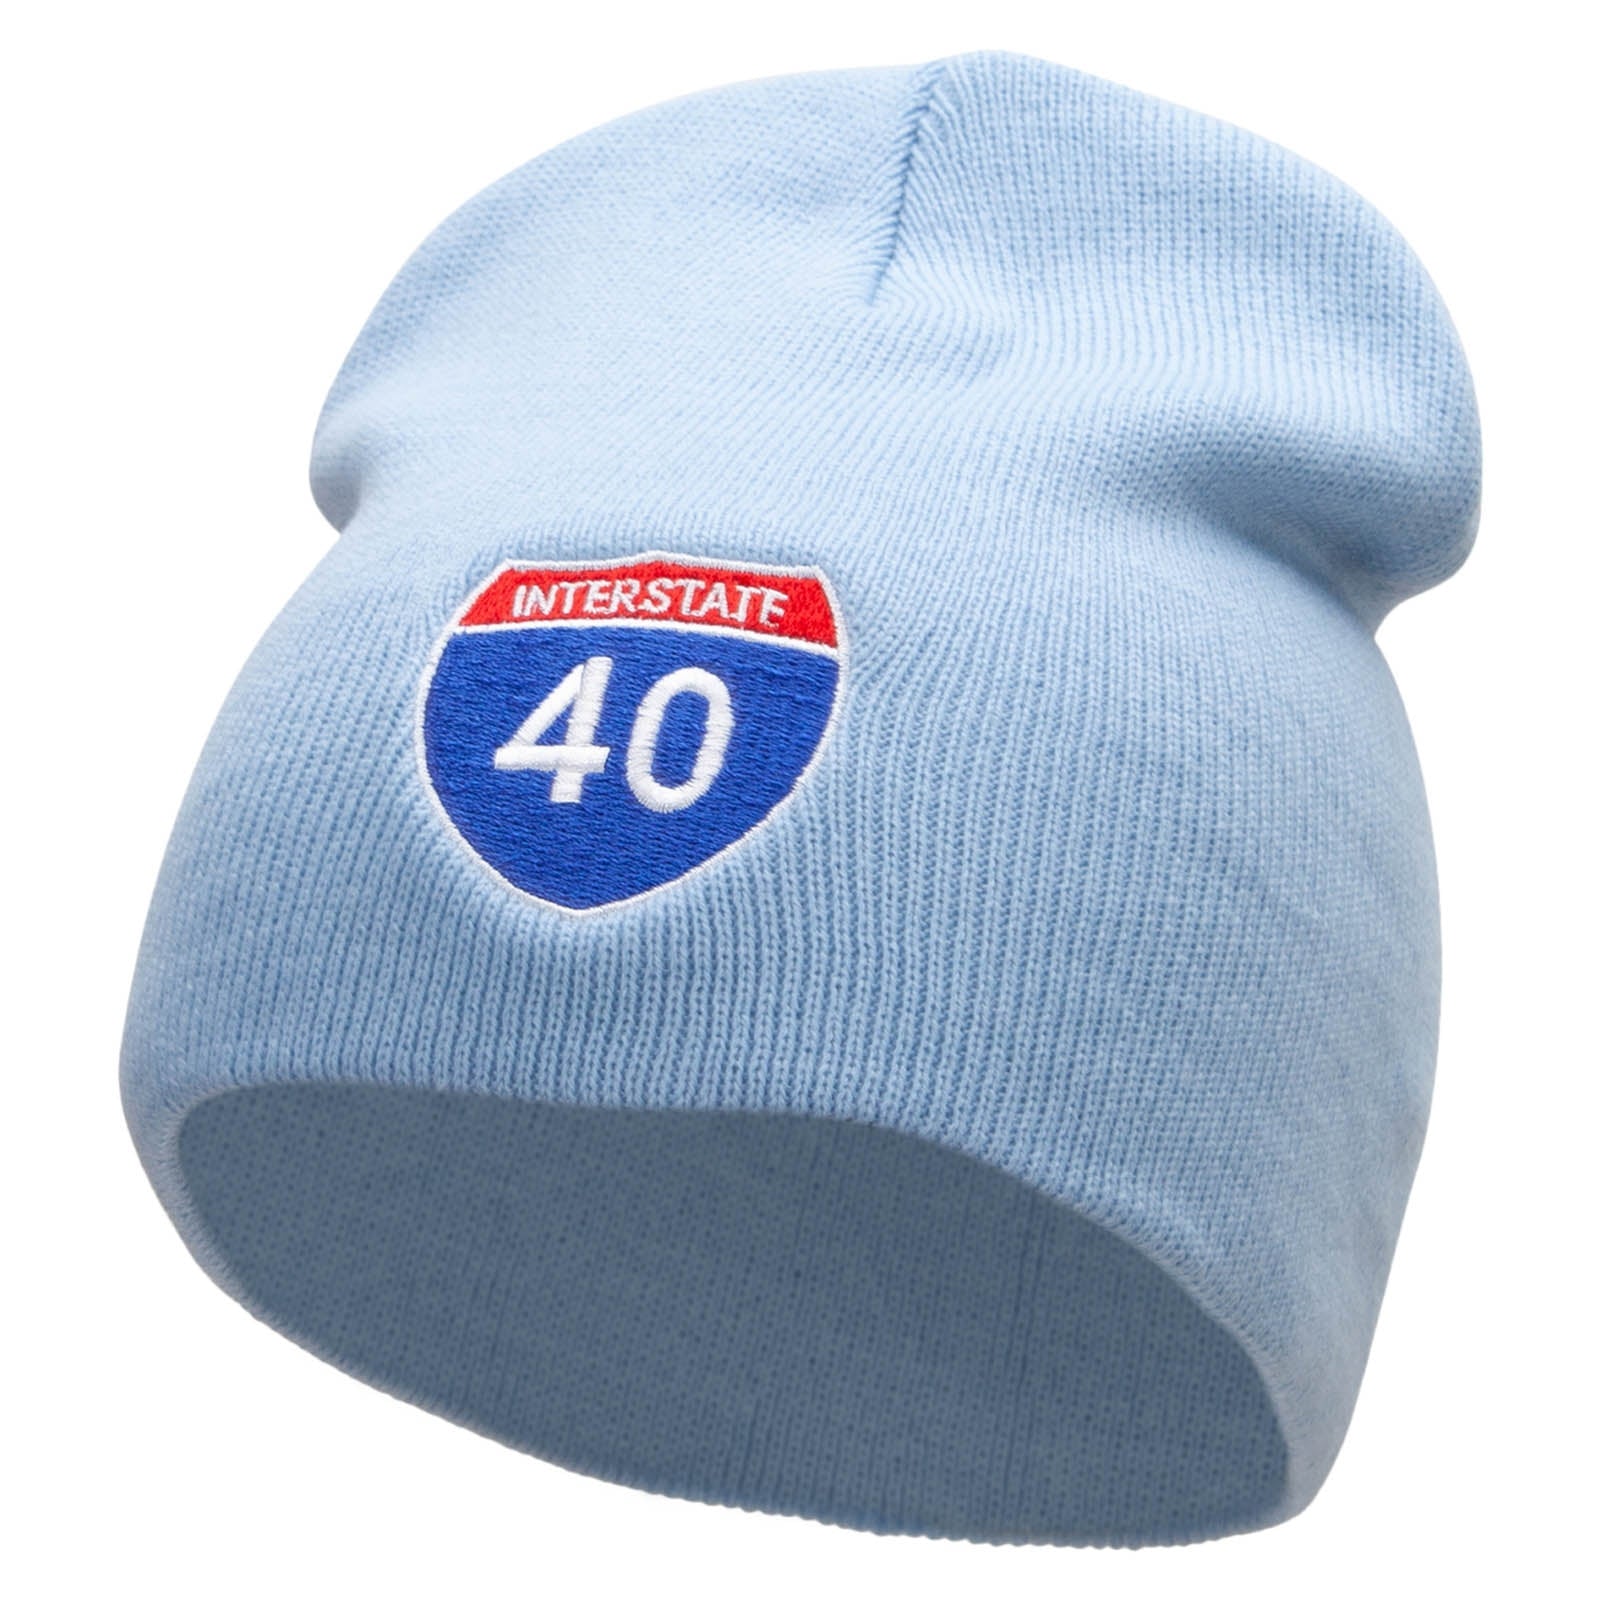 Interstate Highway 40 Sign Embroidered 8 inch Acrylic Short Blank Beanie - Light Blue OSFM